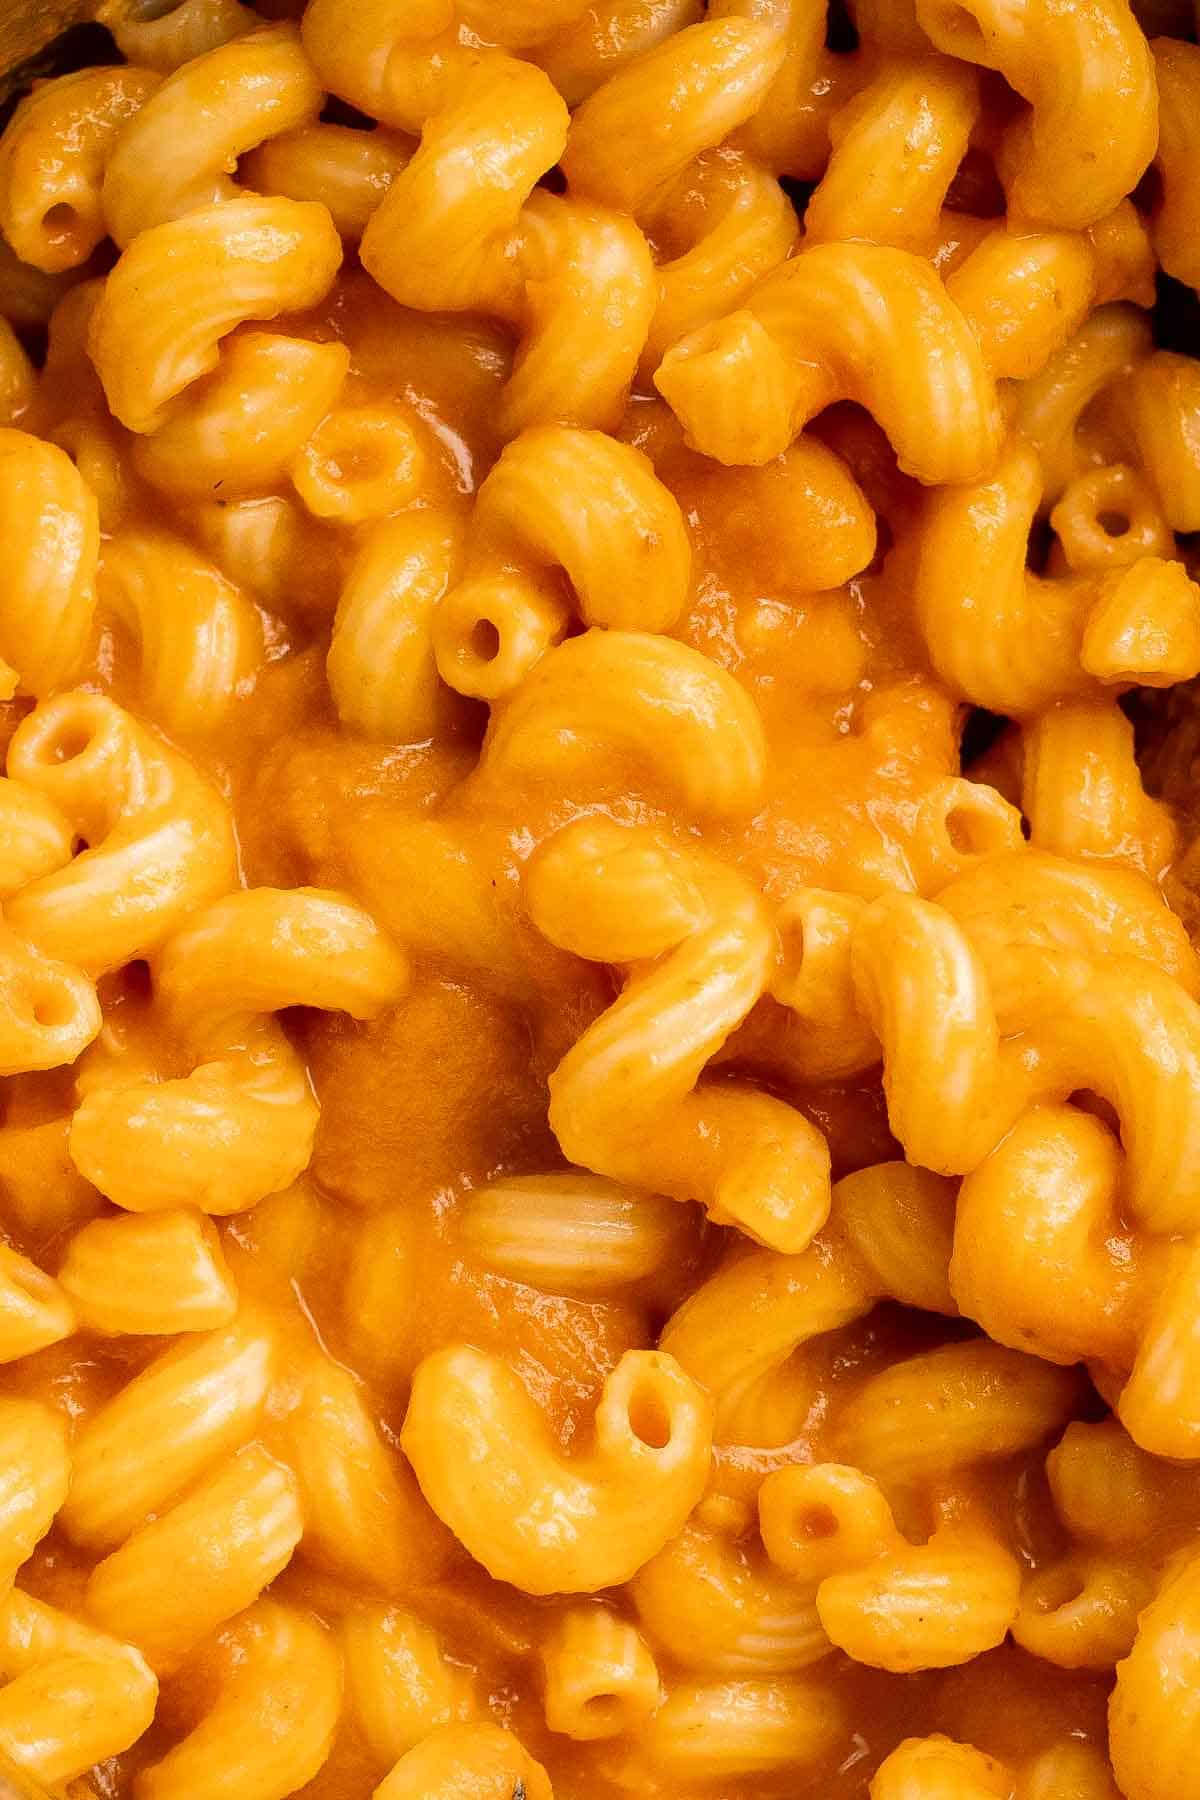 Pumpkin Pasta is one of the quickest and easiest pasta dishes you can make this fall! It's flavorful, creamy, cheesy, and made with real pumpkin! | aheadofthyme.com